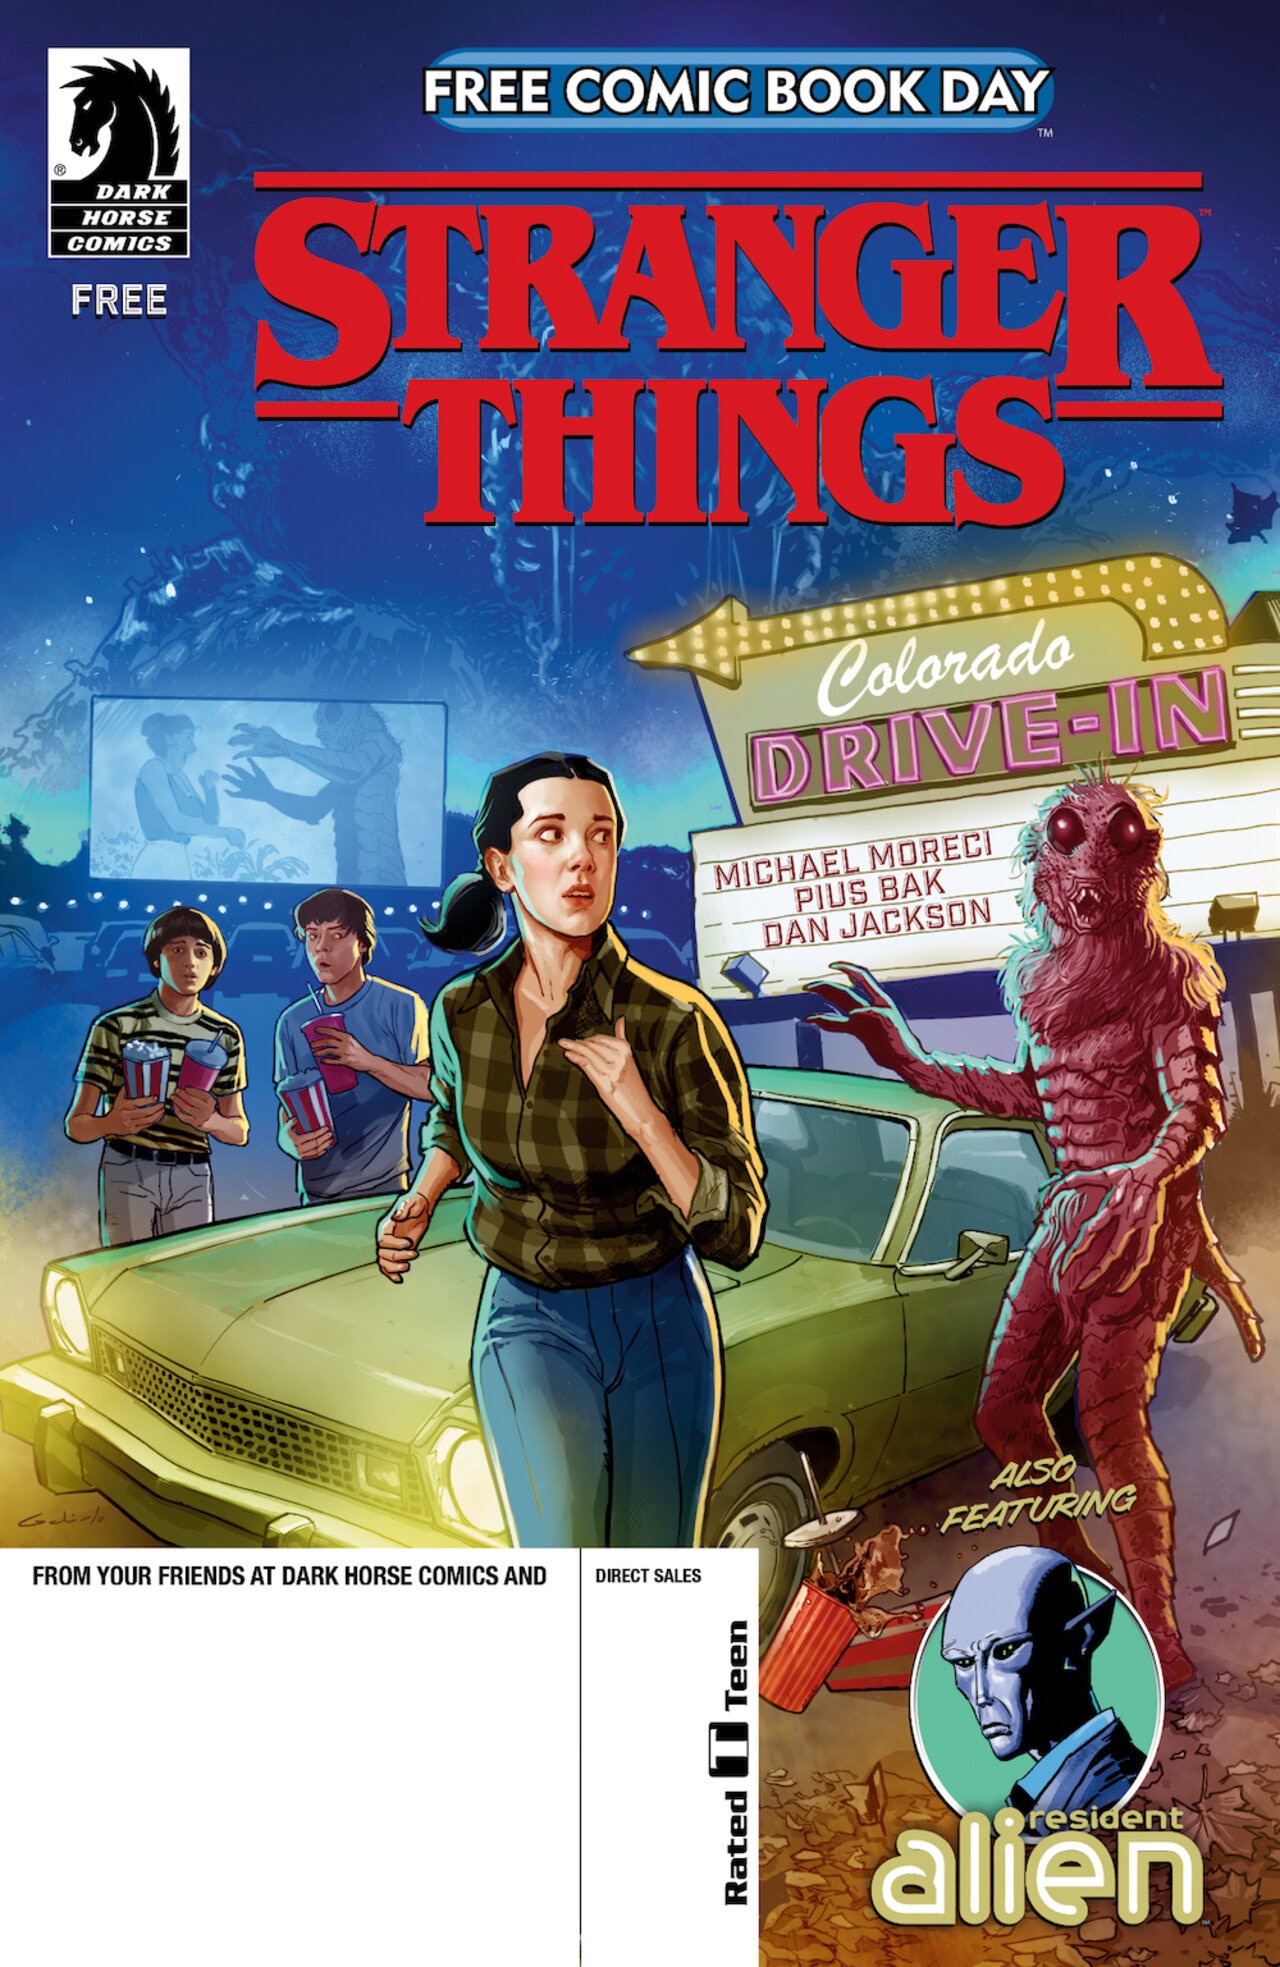 Dark Horse Presents A New 'Stranger Things' Anthology Comic Series – COMICON